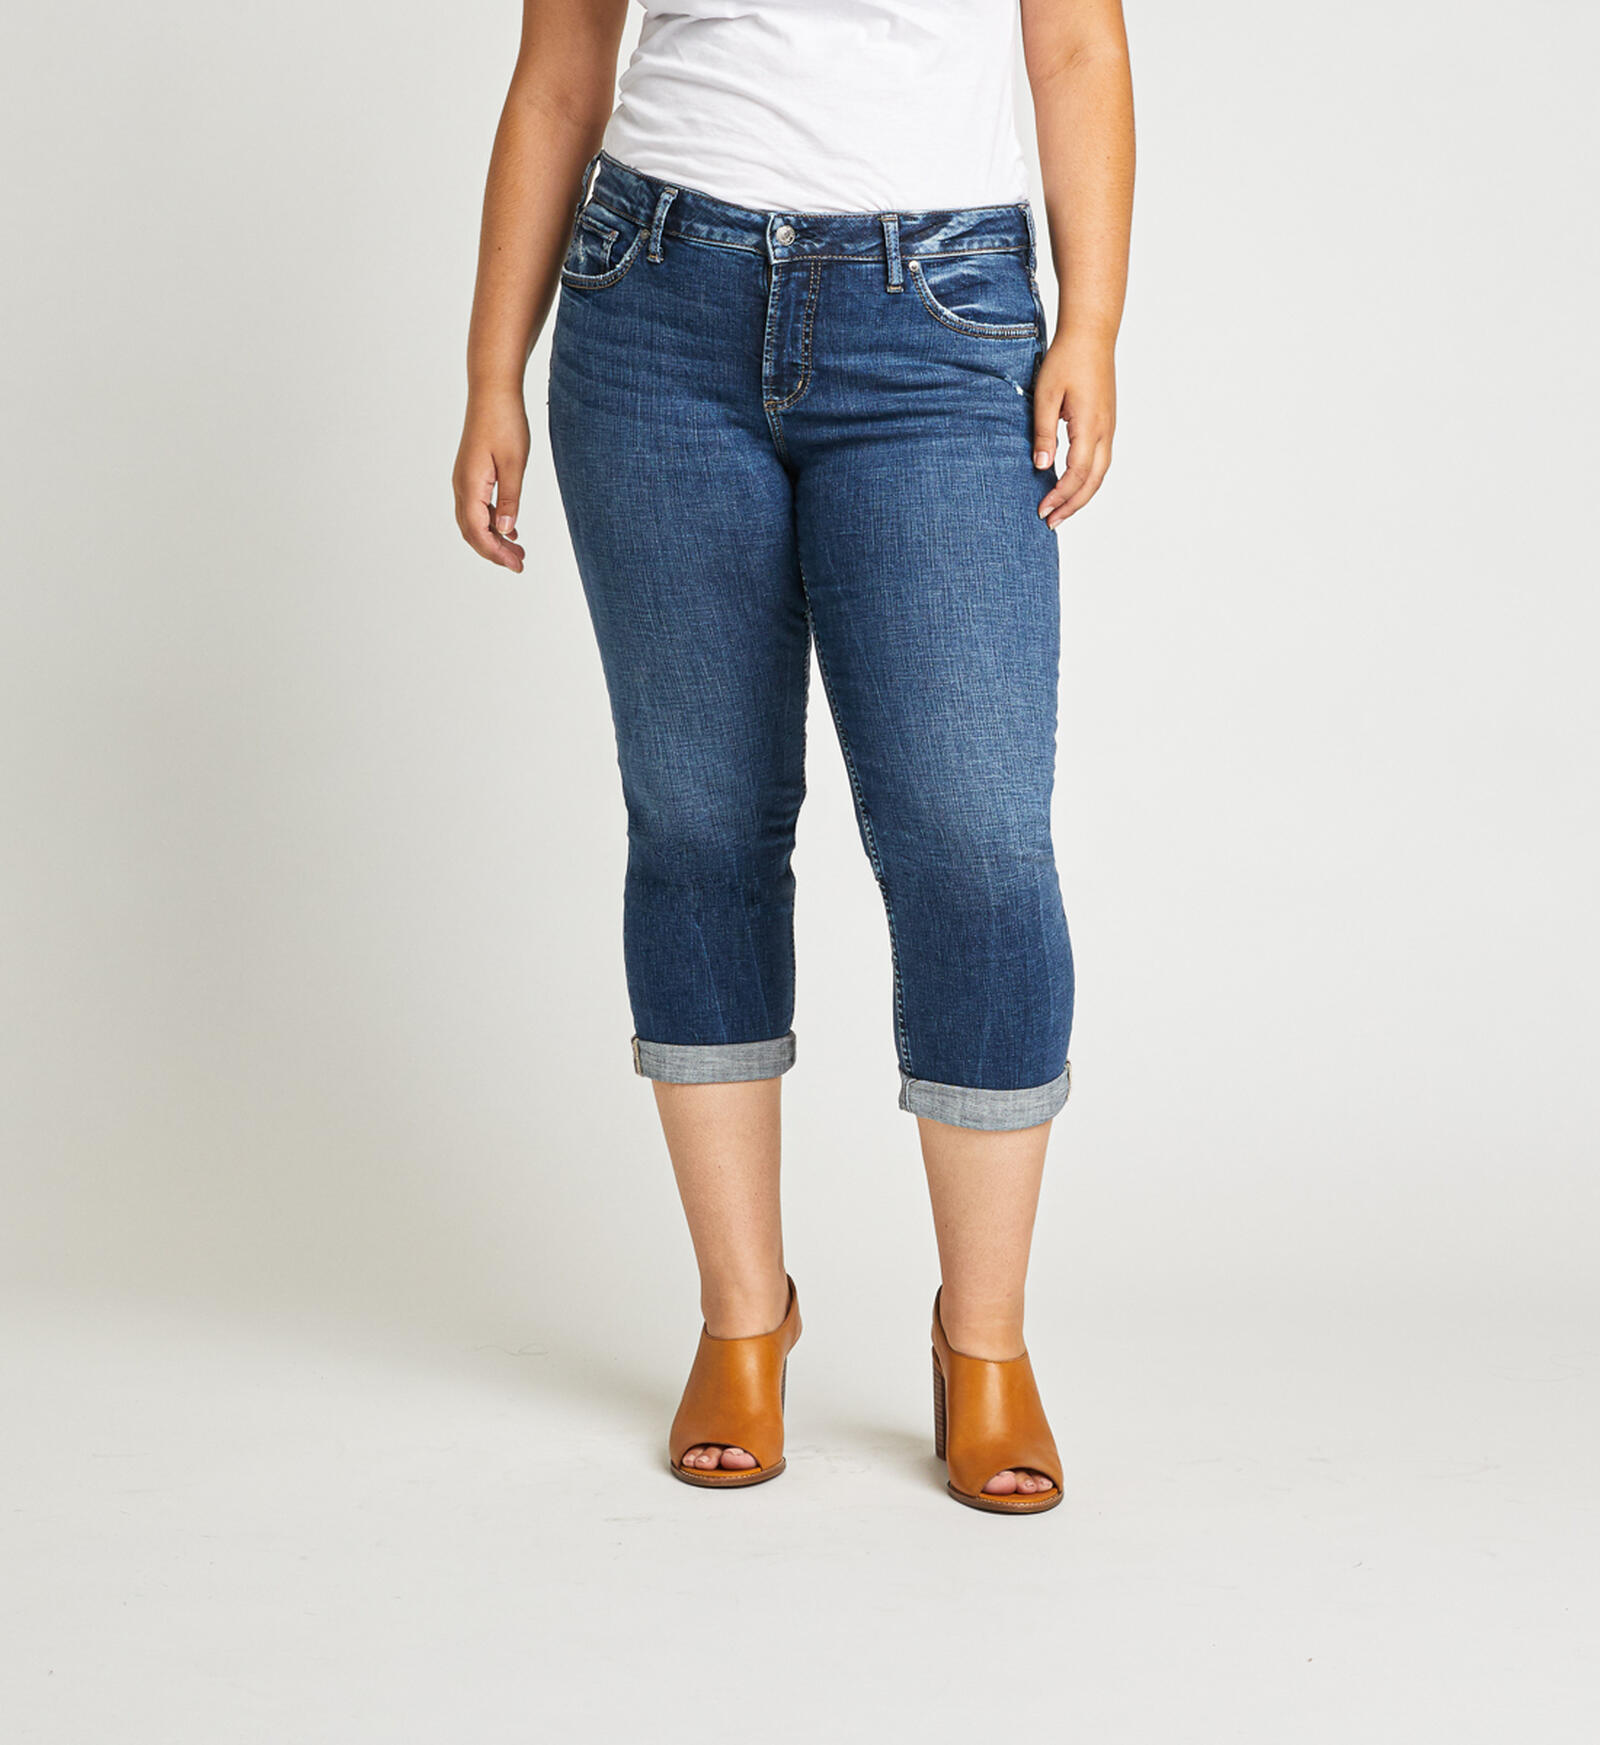 Buy Elyse Mid Rise Capri Plus Size for USD 42.00 | Silver Jeans US New